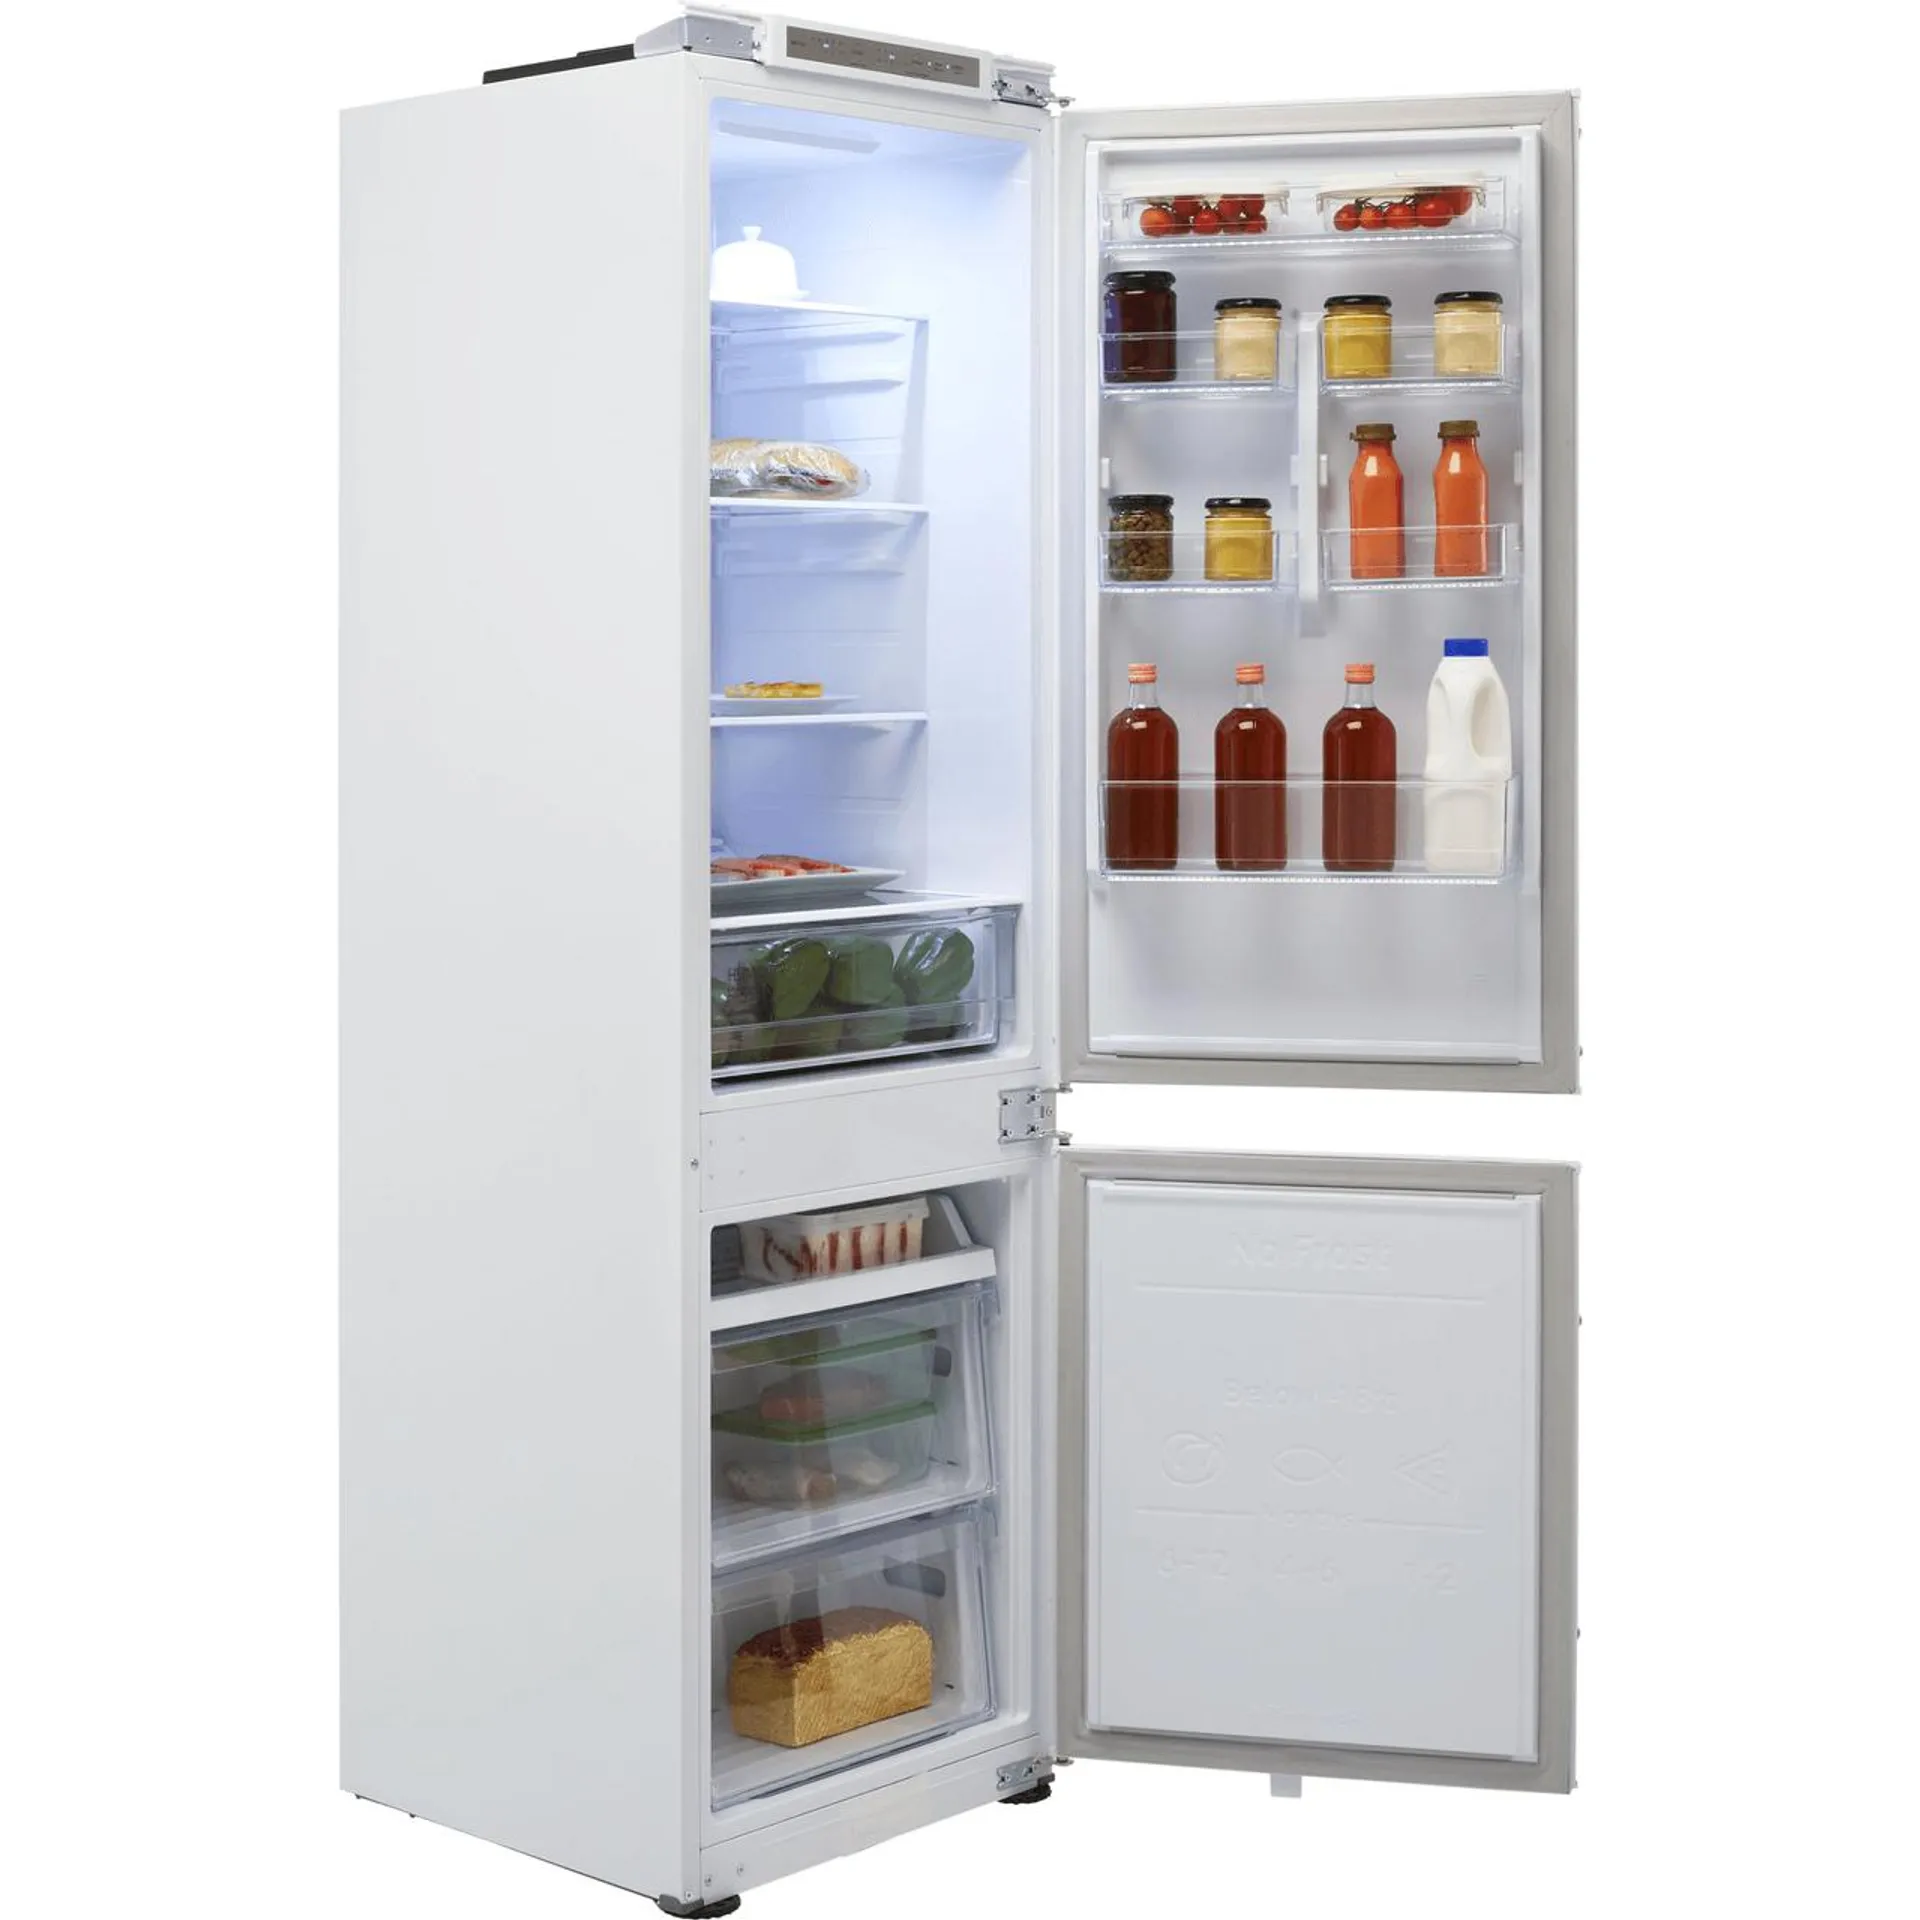 Samsung Series 5 BRB26600FWW Integrated 70/30 Total No Frost Fridge Freezer with Sliding Door Fixing Kit - White - F Rated